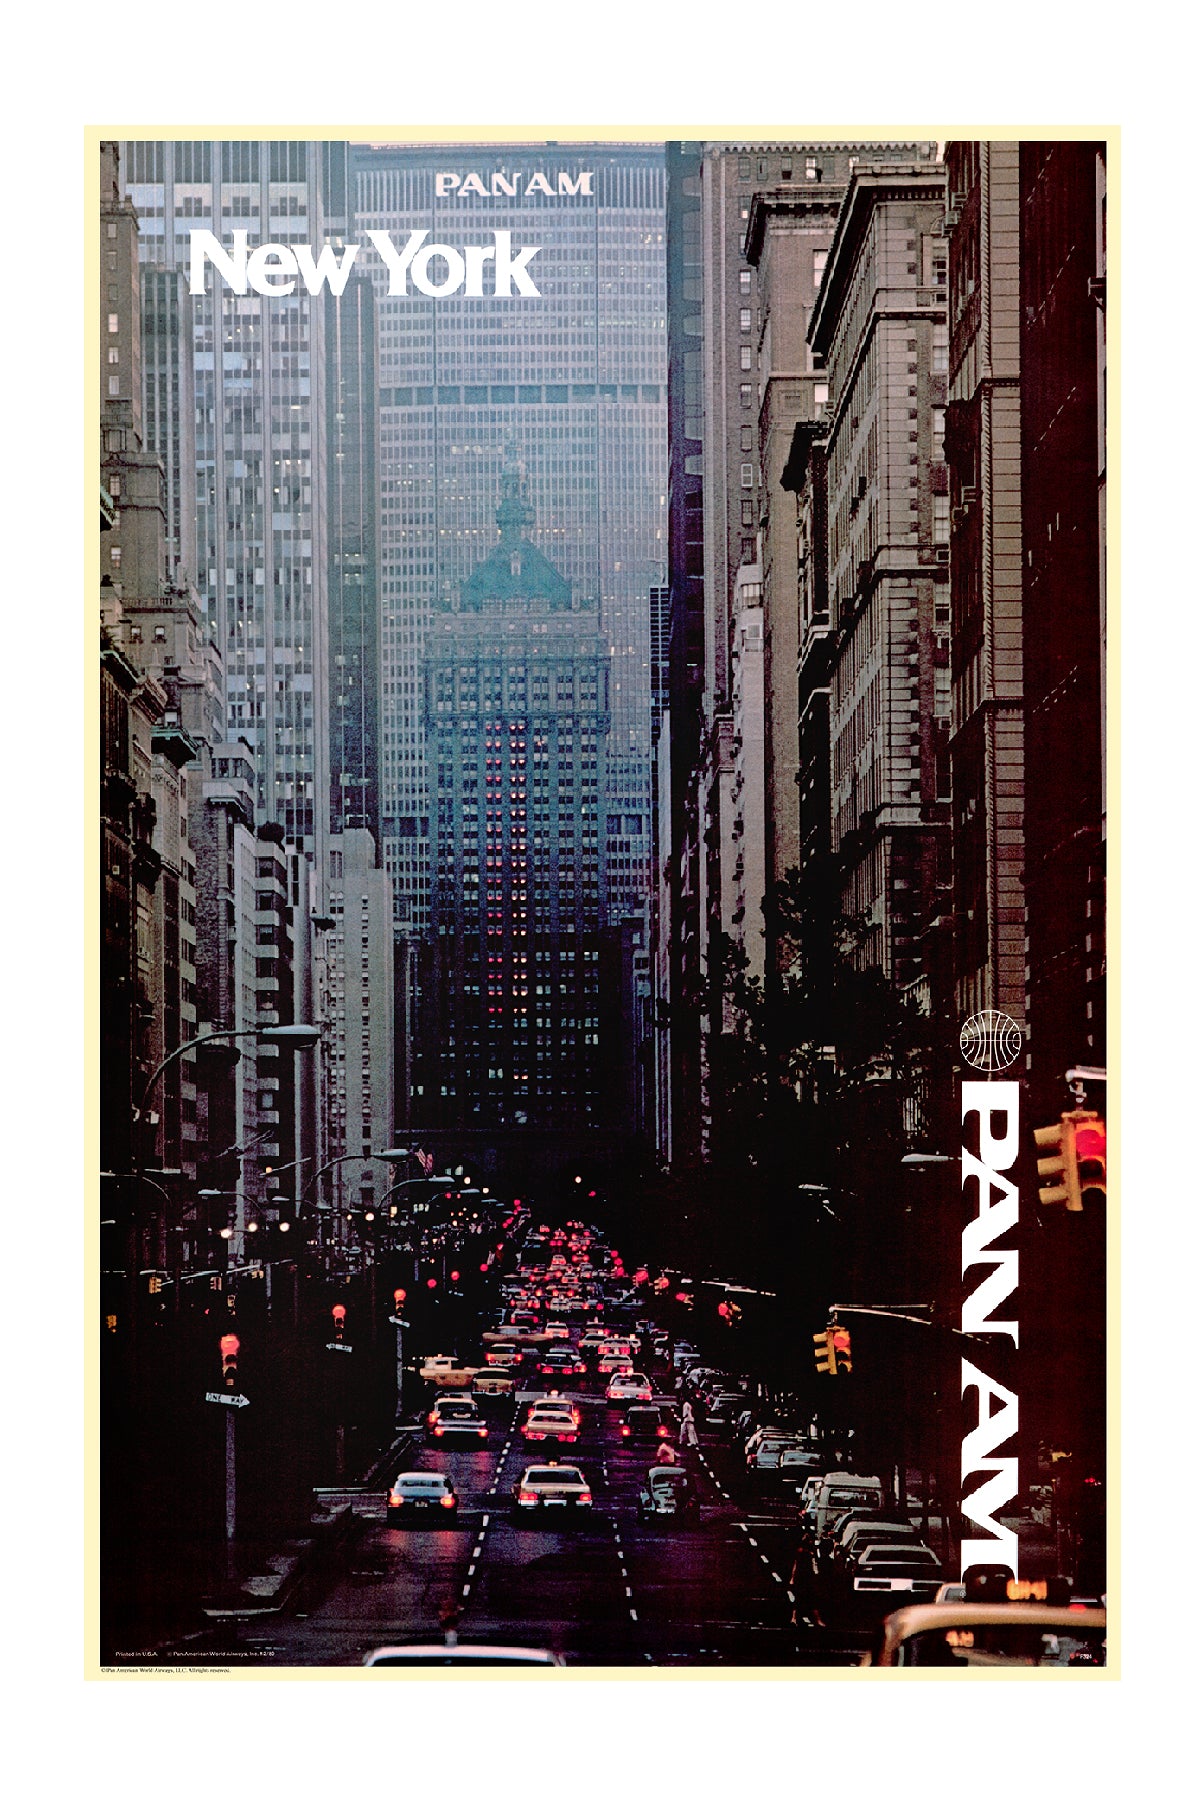 New York, Pan Am, 1960s. [5th Ave]